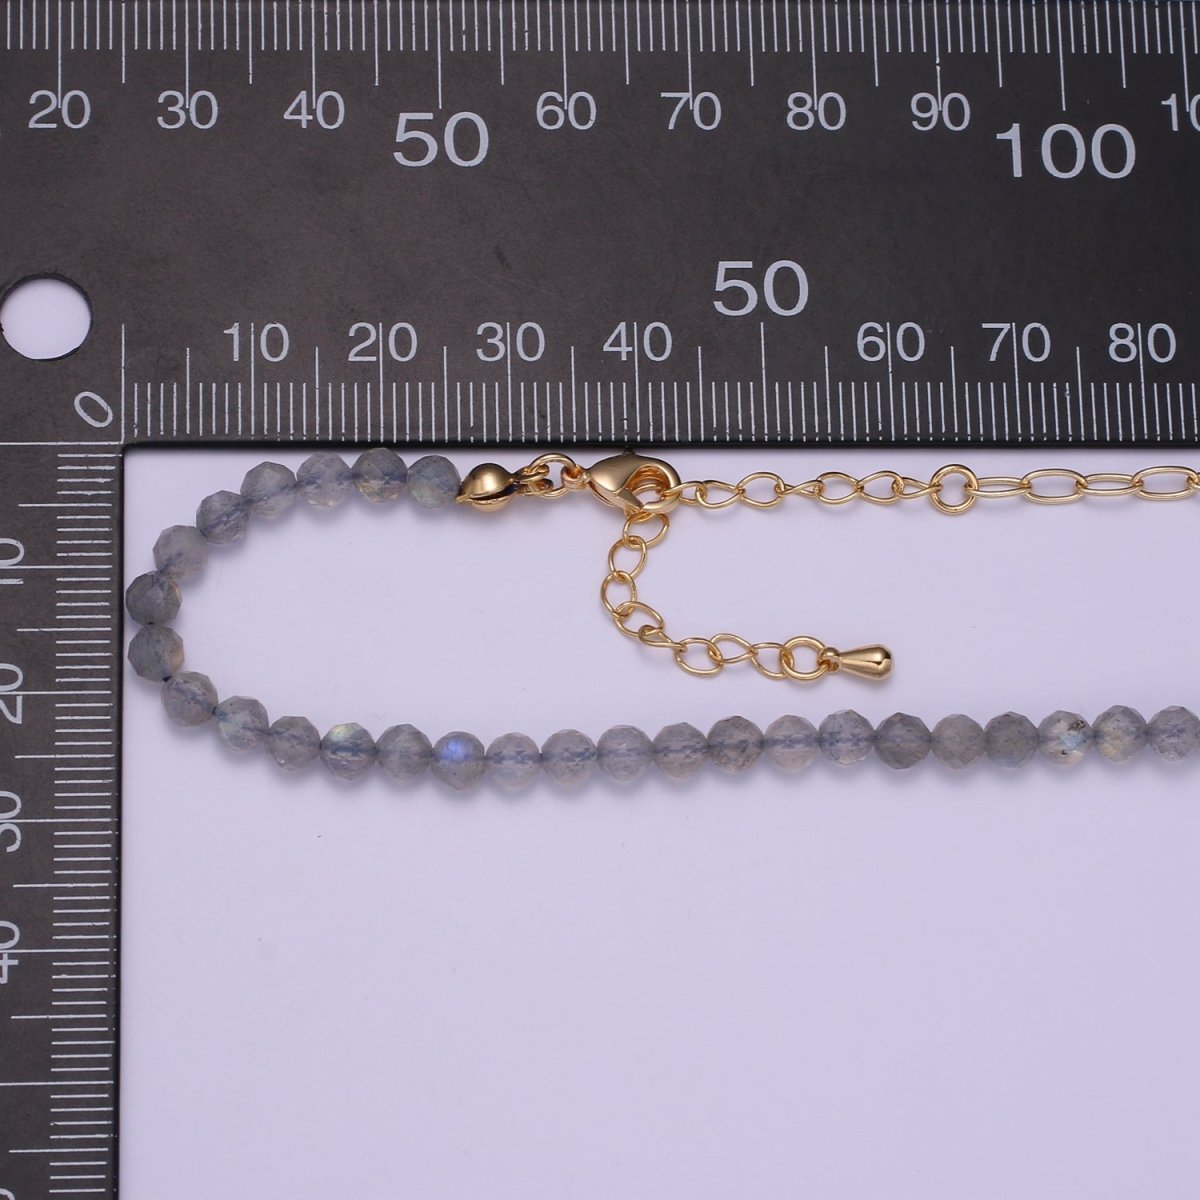 Mixed Chain Necklace, Fused Labradorite Beads necklace w/ 14k Gold Filled Necklace, Cable Link Chain Necklace, Unique Dainty Necklace | WA-030 Clearance Pricing - DLUXCA